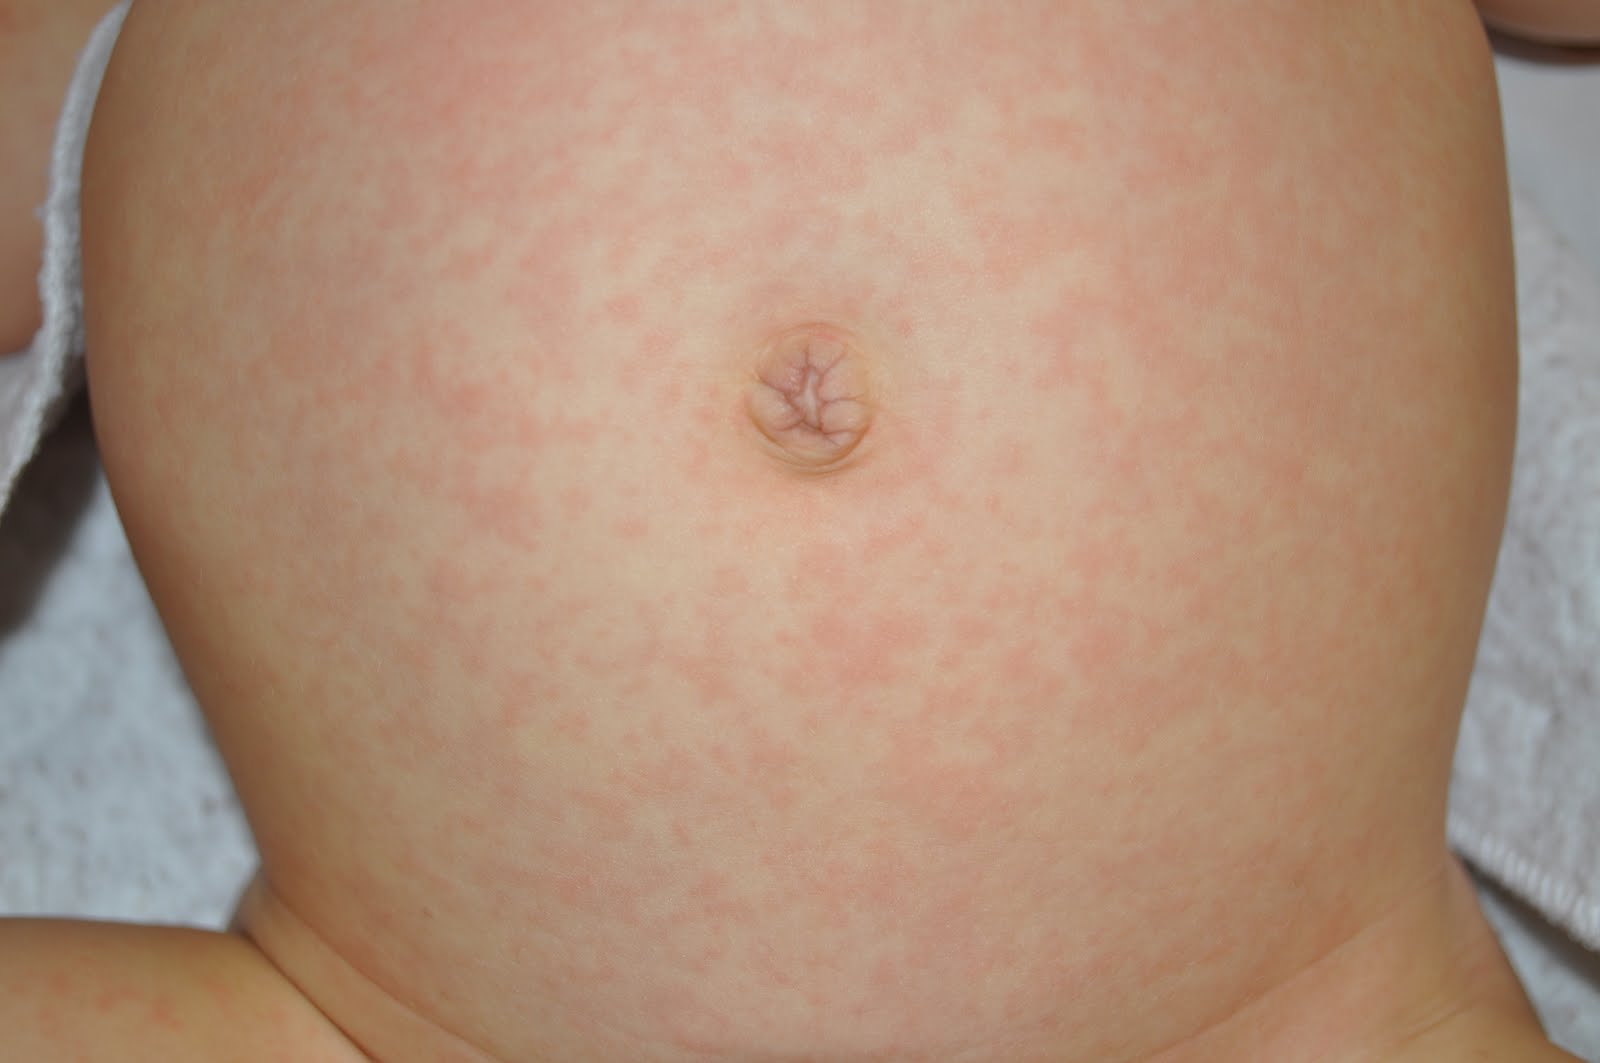 Roseola - Topic Overview - WebMD